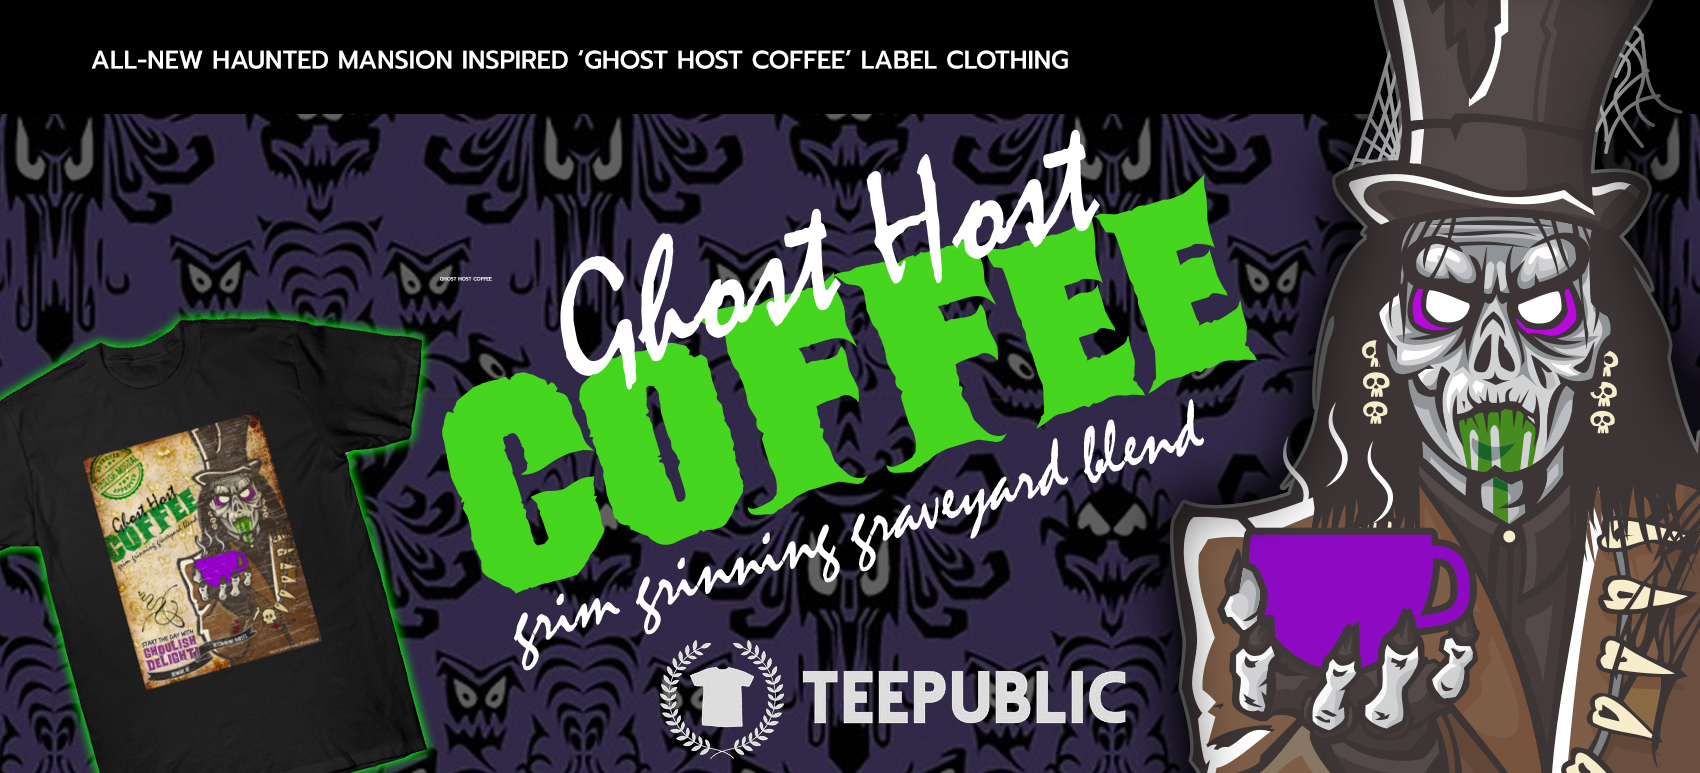 Haunted Mansion Inspired Grim Grinning 'Ghost Host Coffee' Label Clothing Released